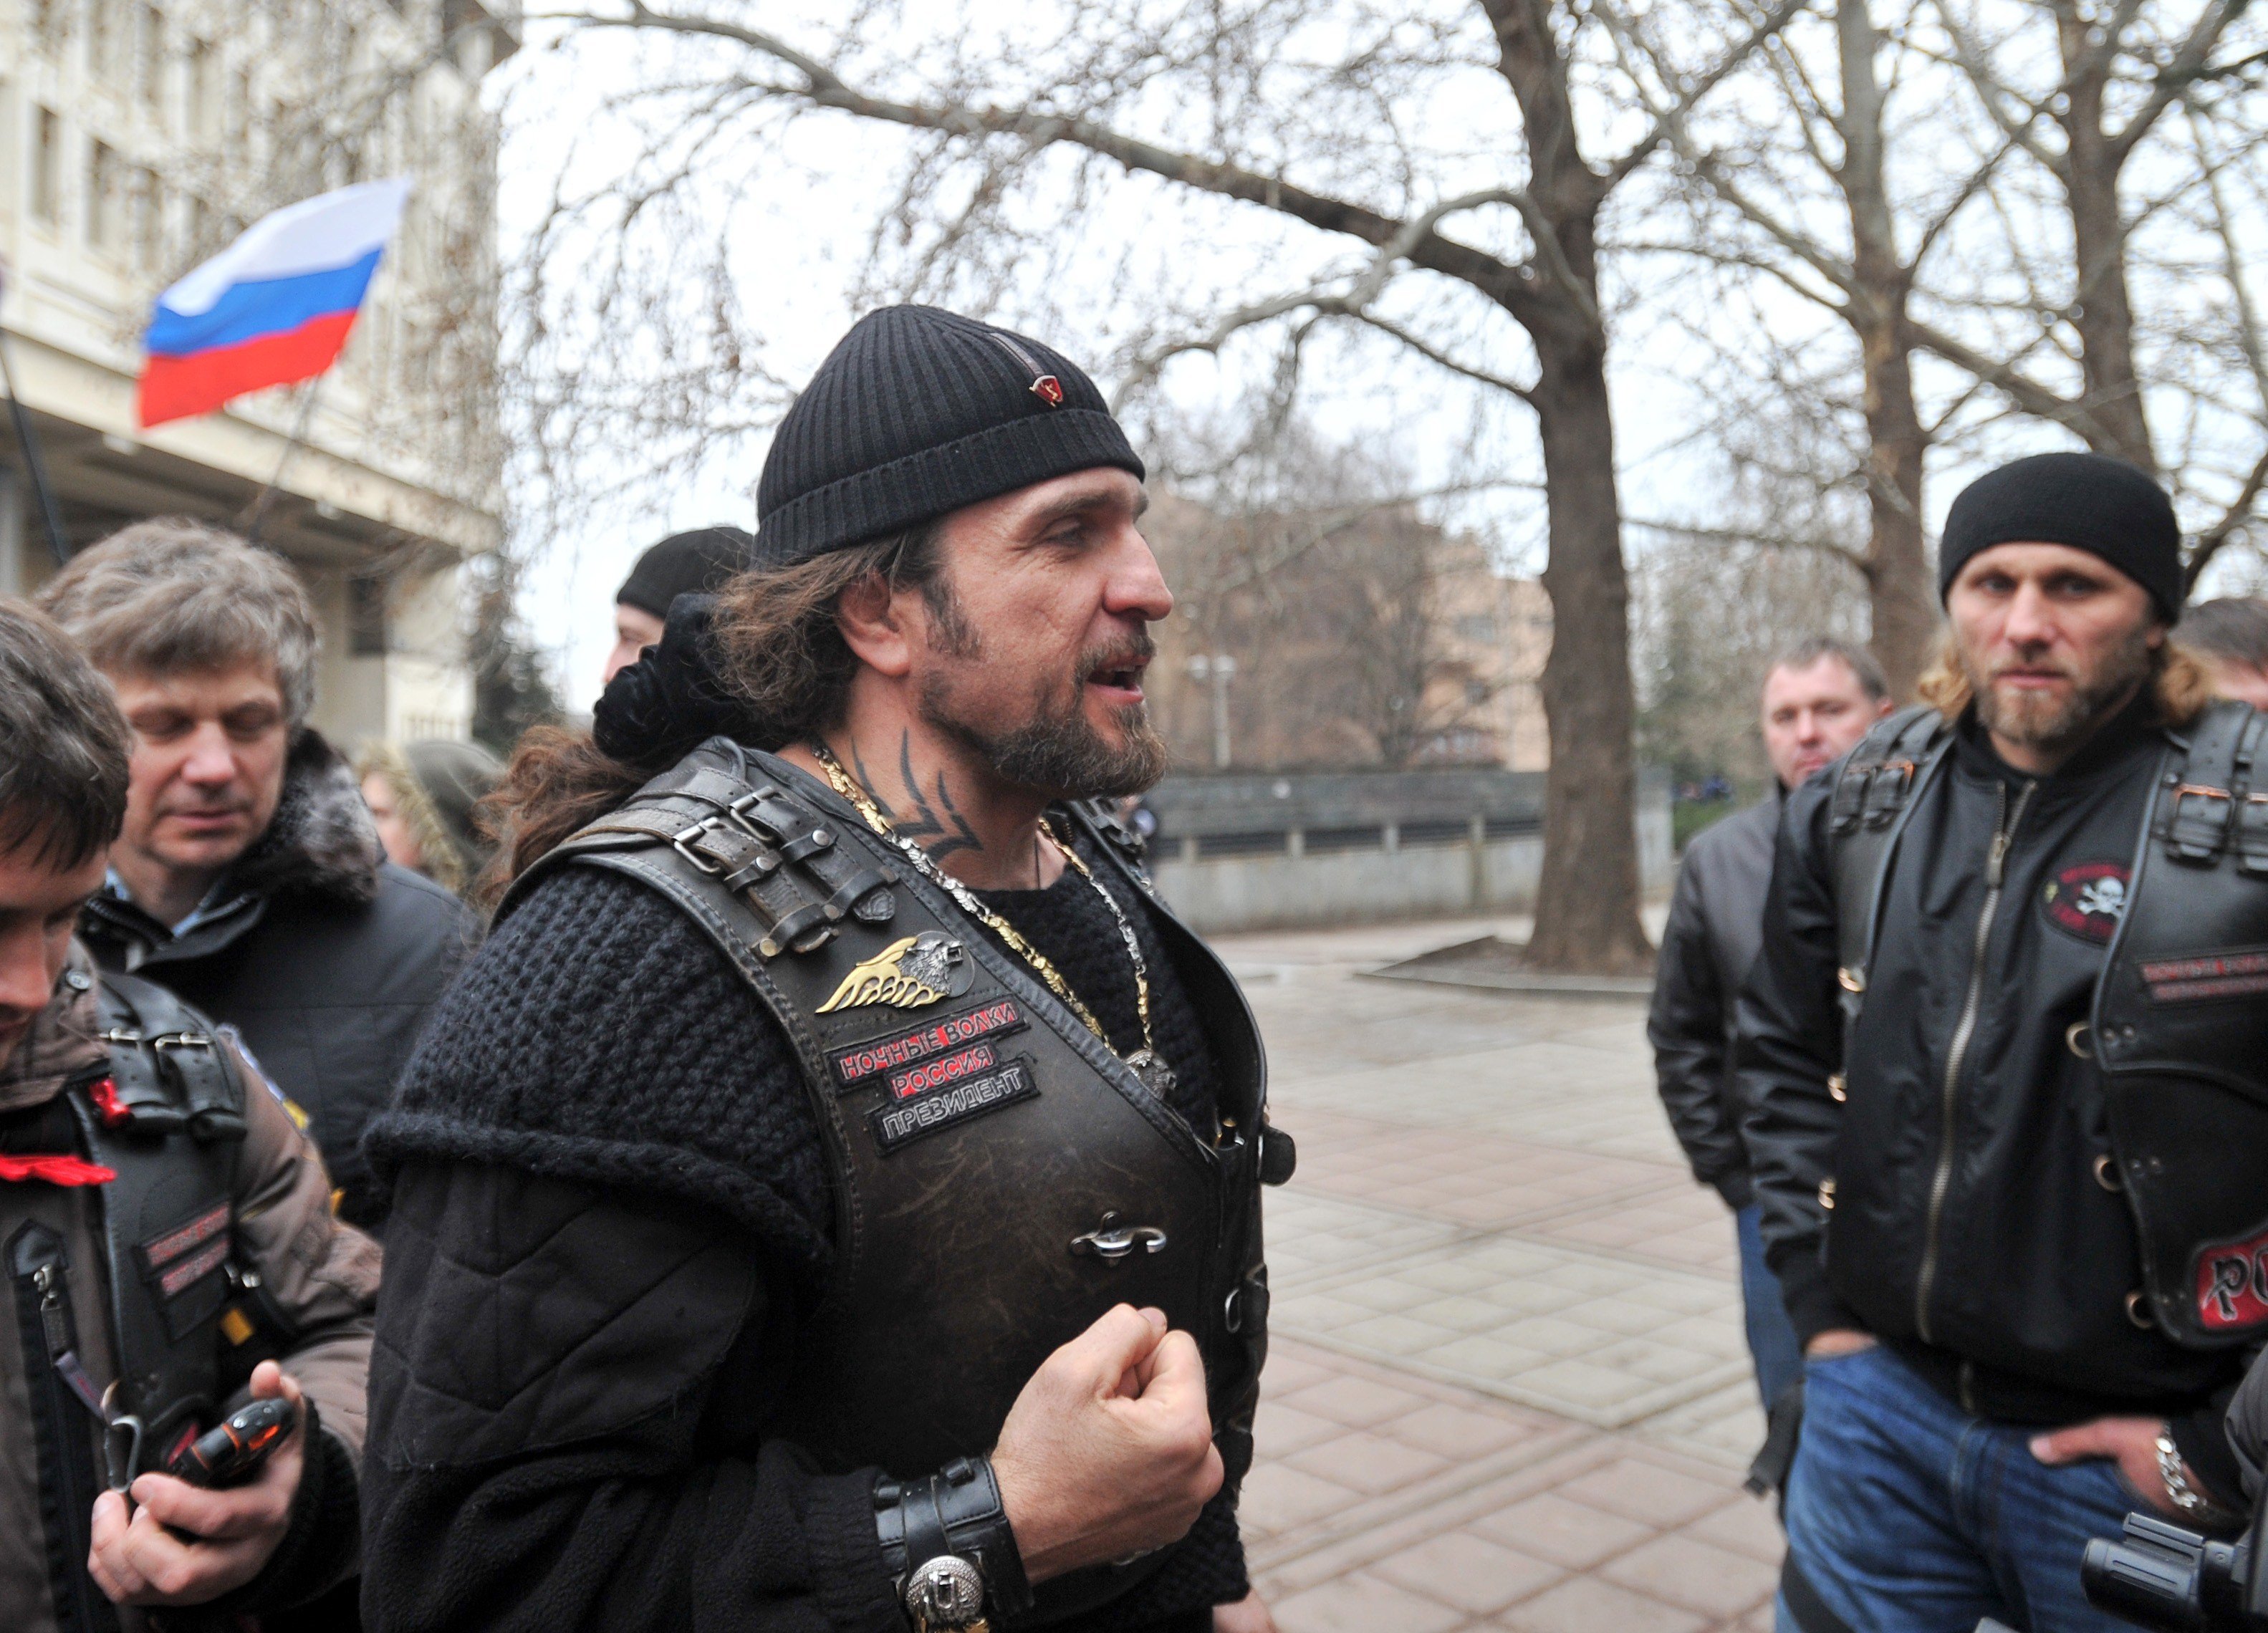 Alexander Zaldostanov attends a rally of pro-Russian activists waving the Russian flag, in front of the local parliament building on February 28, 2014 in Simferopol, Crimea, Ukraine.